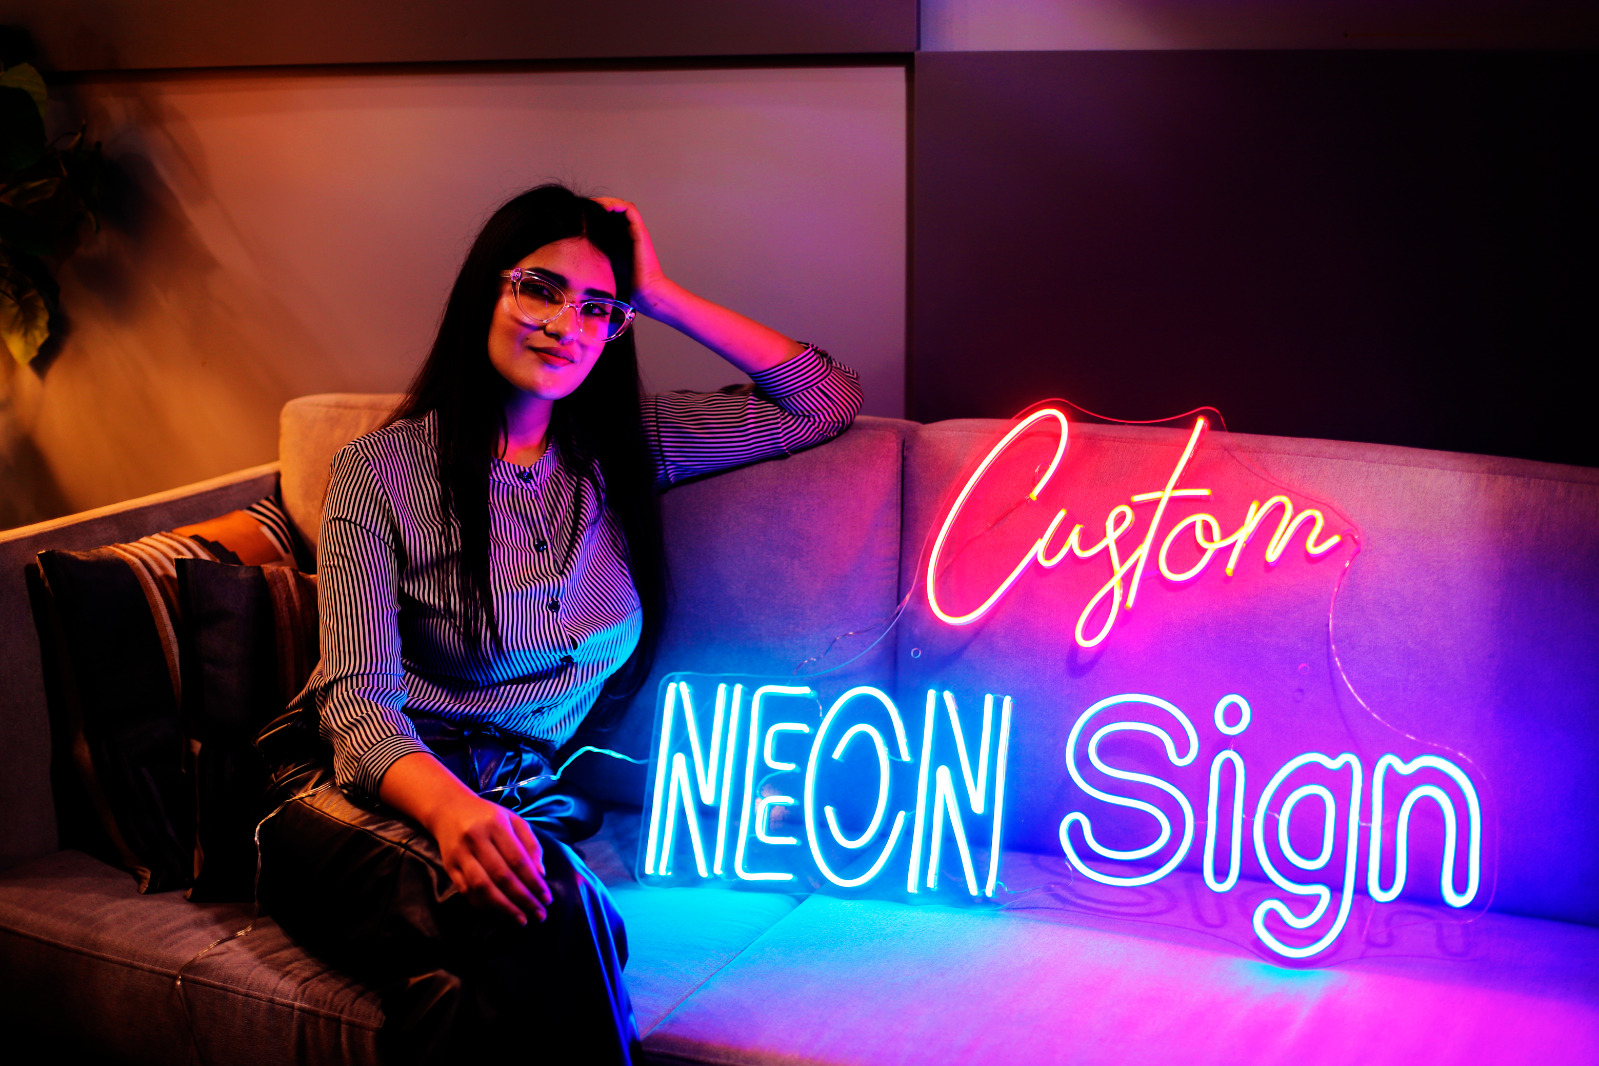 Custom Neon Sign LED Personalized for Wall Decor, Acrylic neon light sign custom